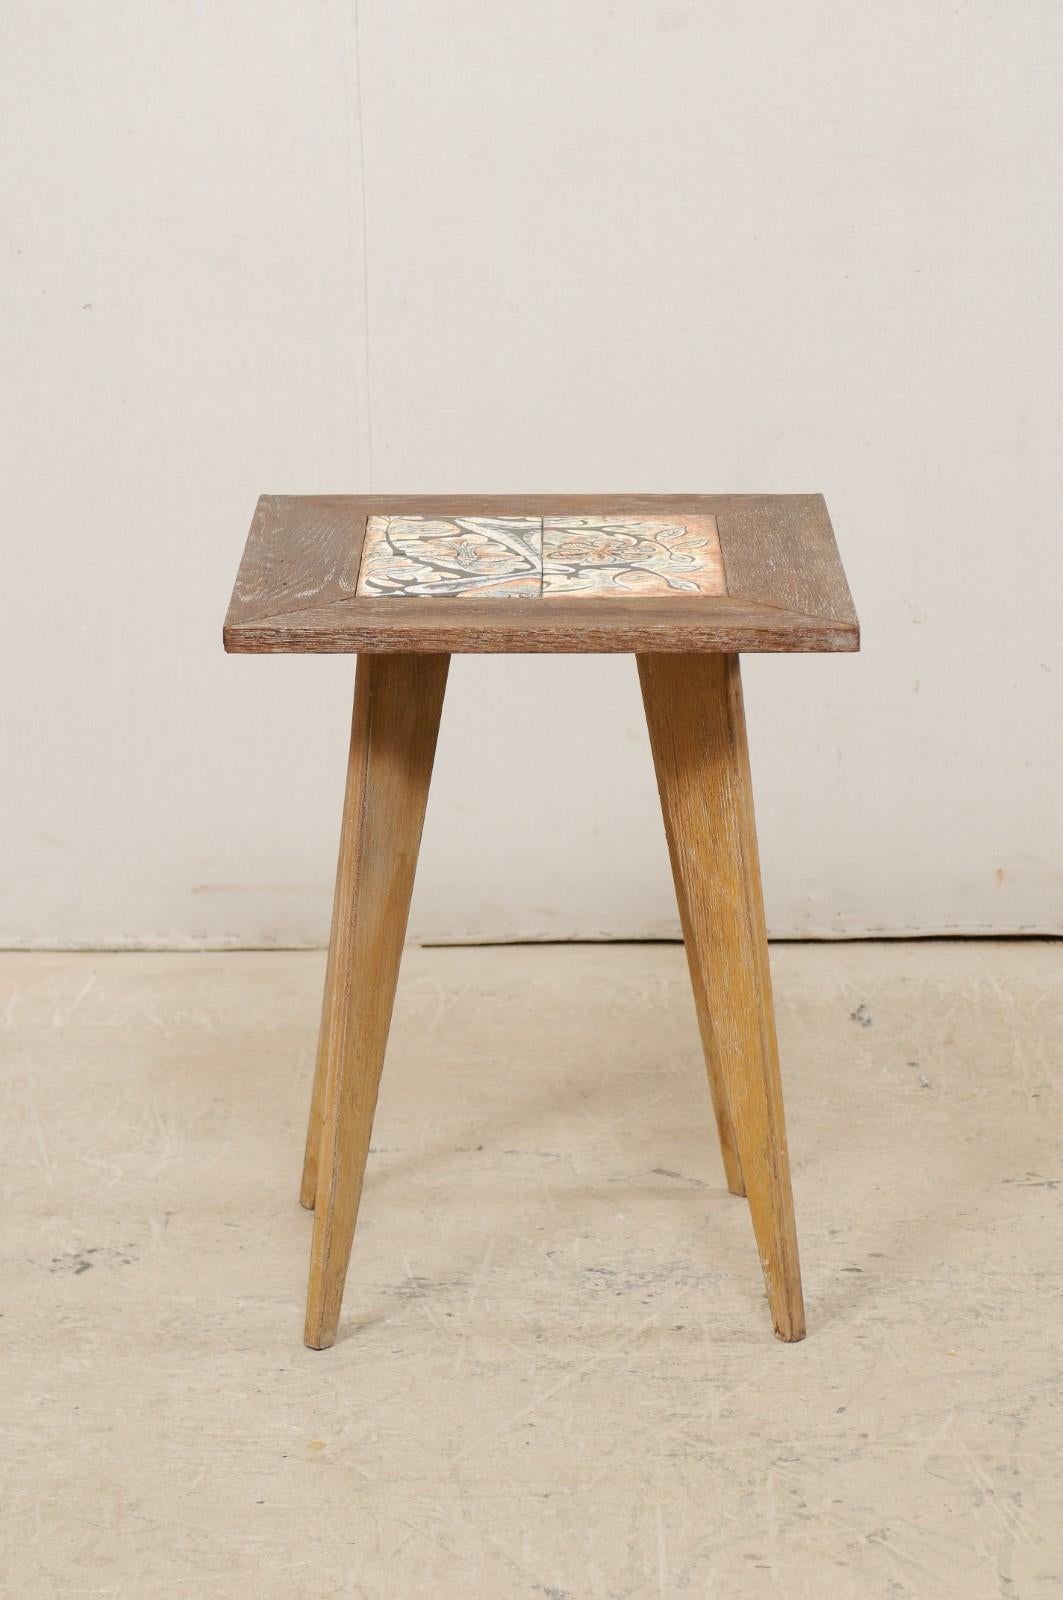 Midcentury Side Table with Painted Tile Top Attributed to Anton Refreiger 1